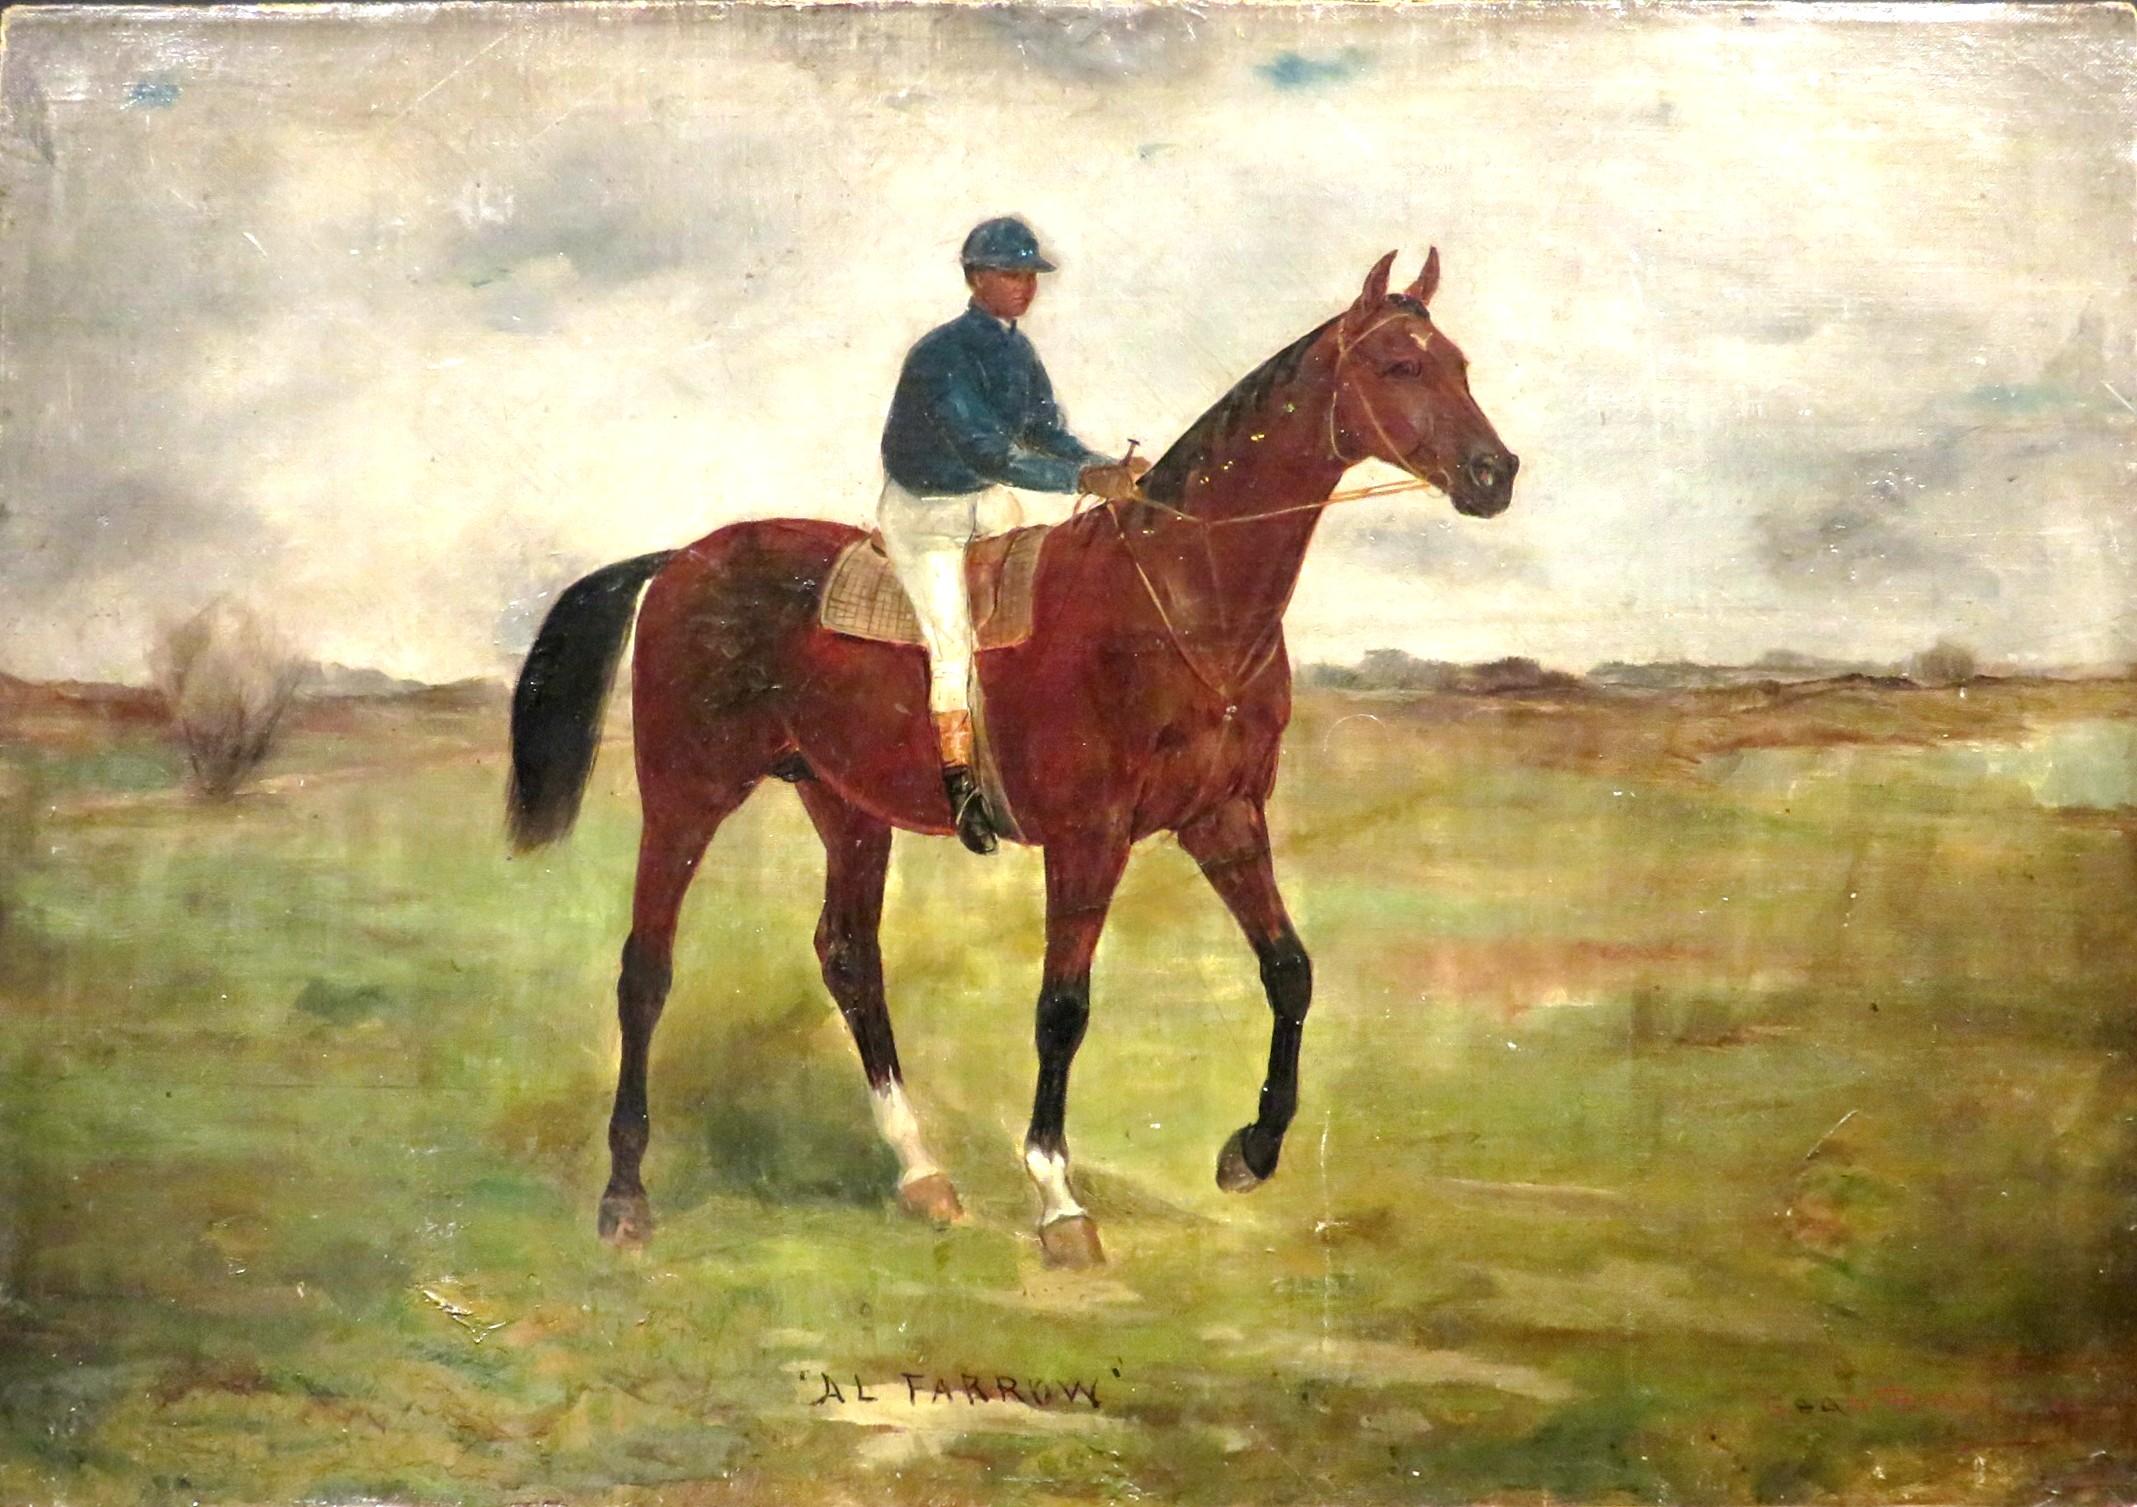 Sporting Art A 19th Century Equestrian Sporting Painting Titled 'Al Farrow' by Gean Smith For Sale